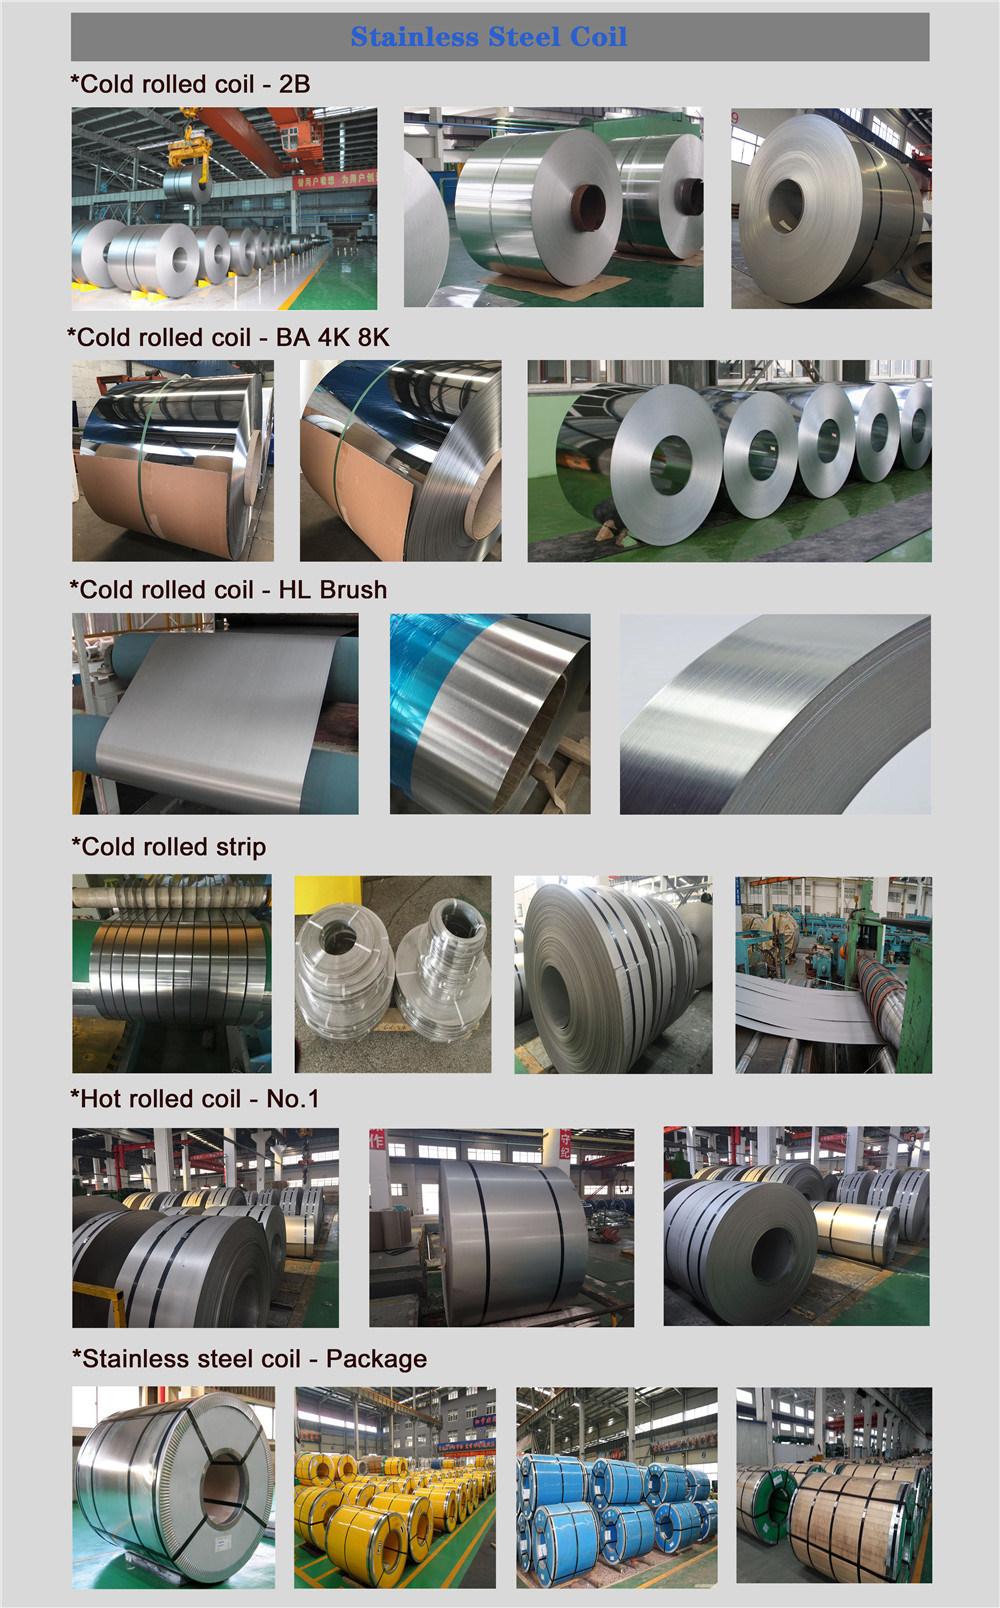 Low Price Guaranteed Quality Steel Material 430 201 Polished Stainless Steel Coil Sheet